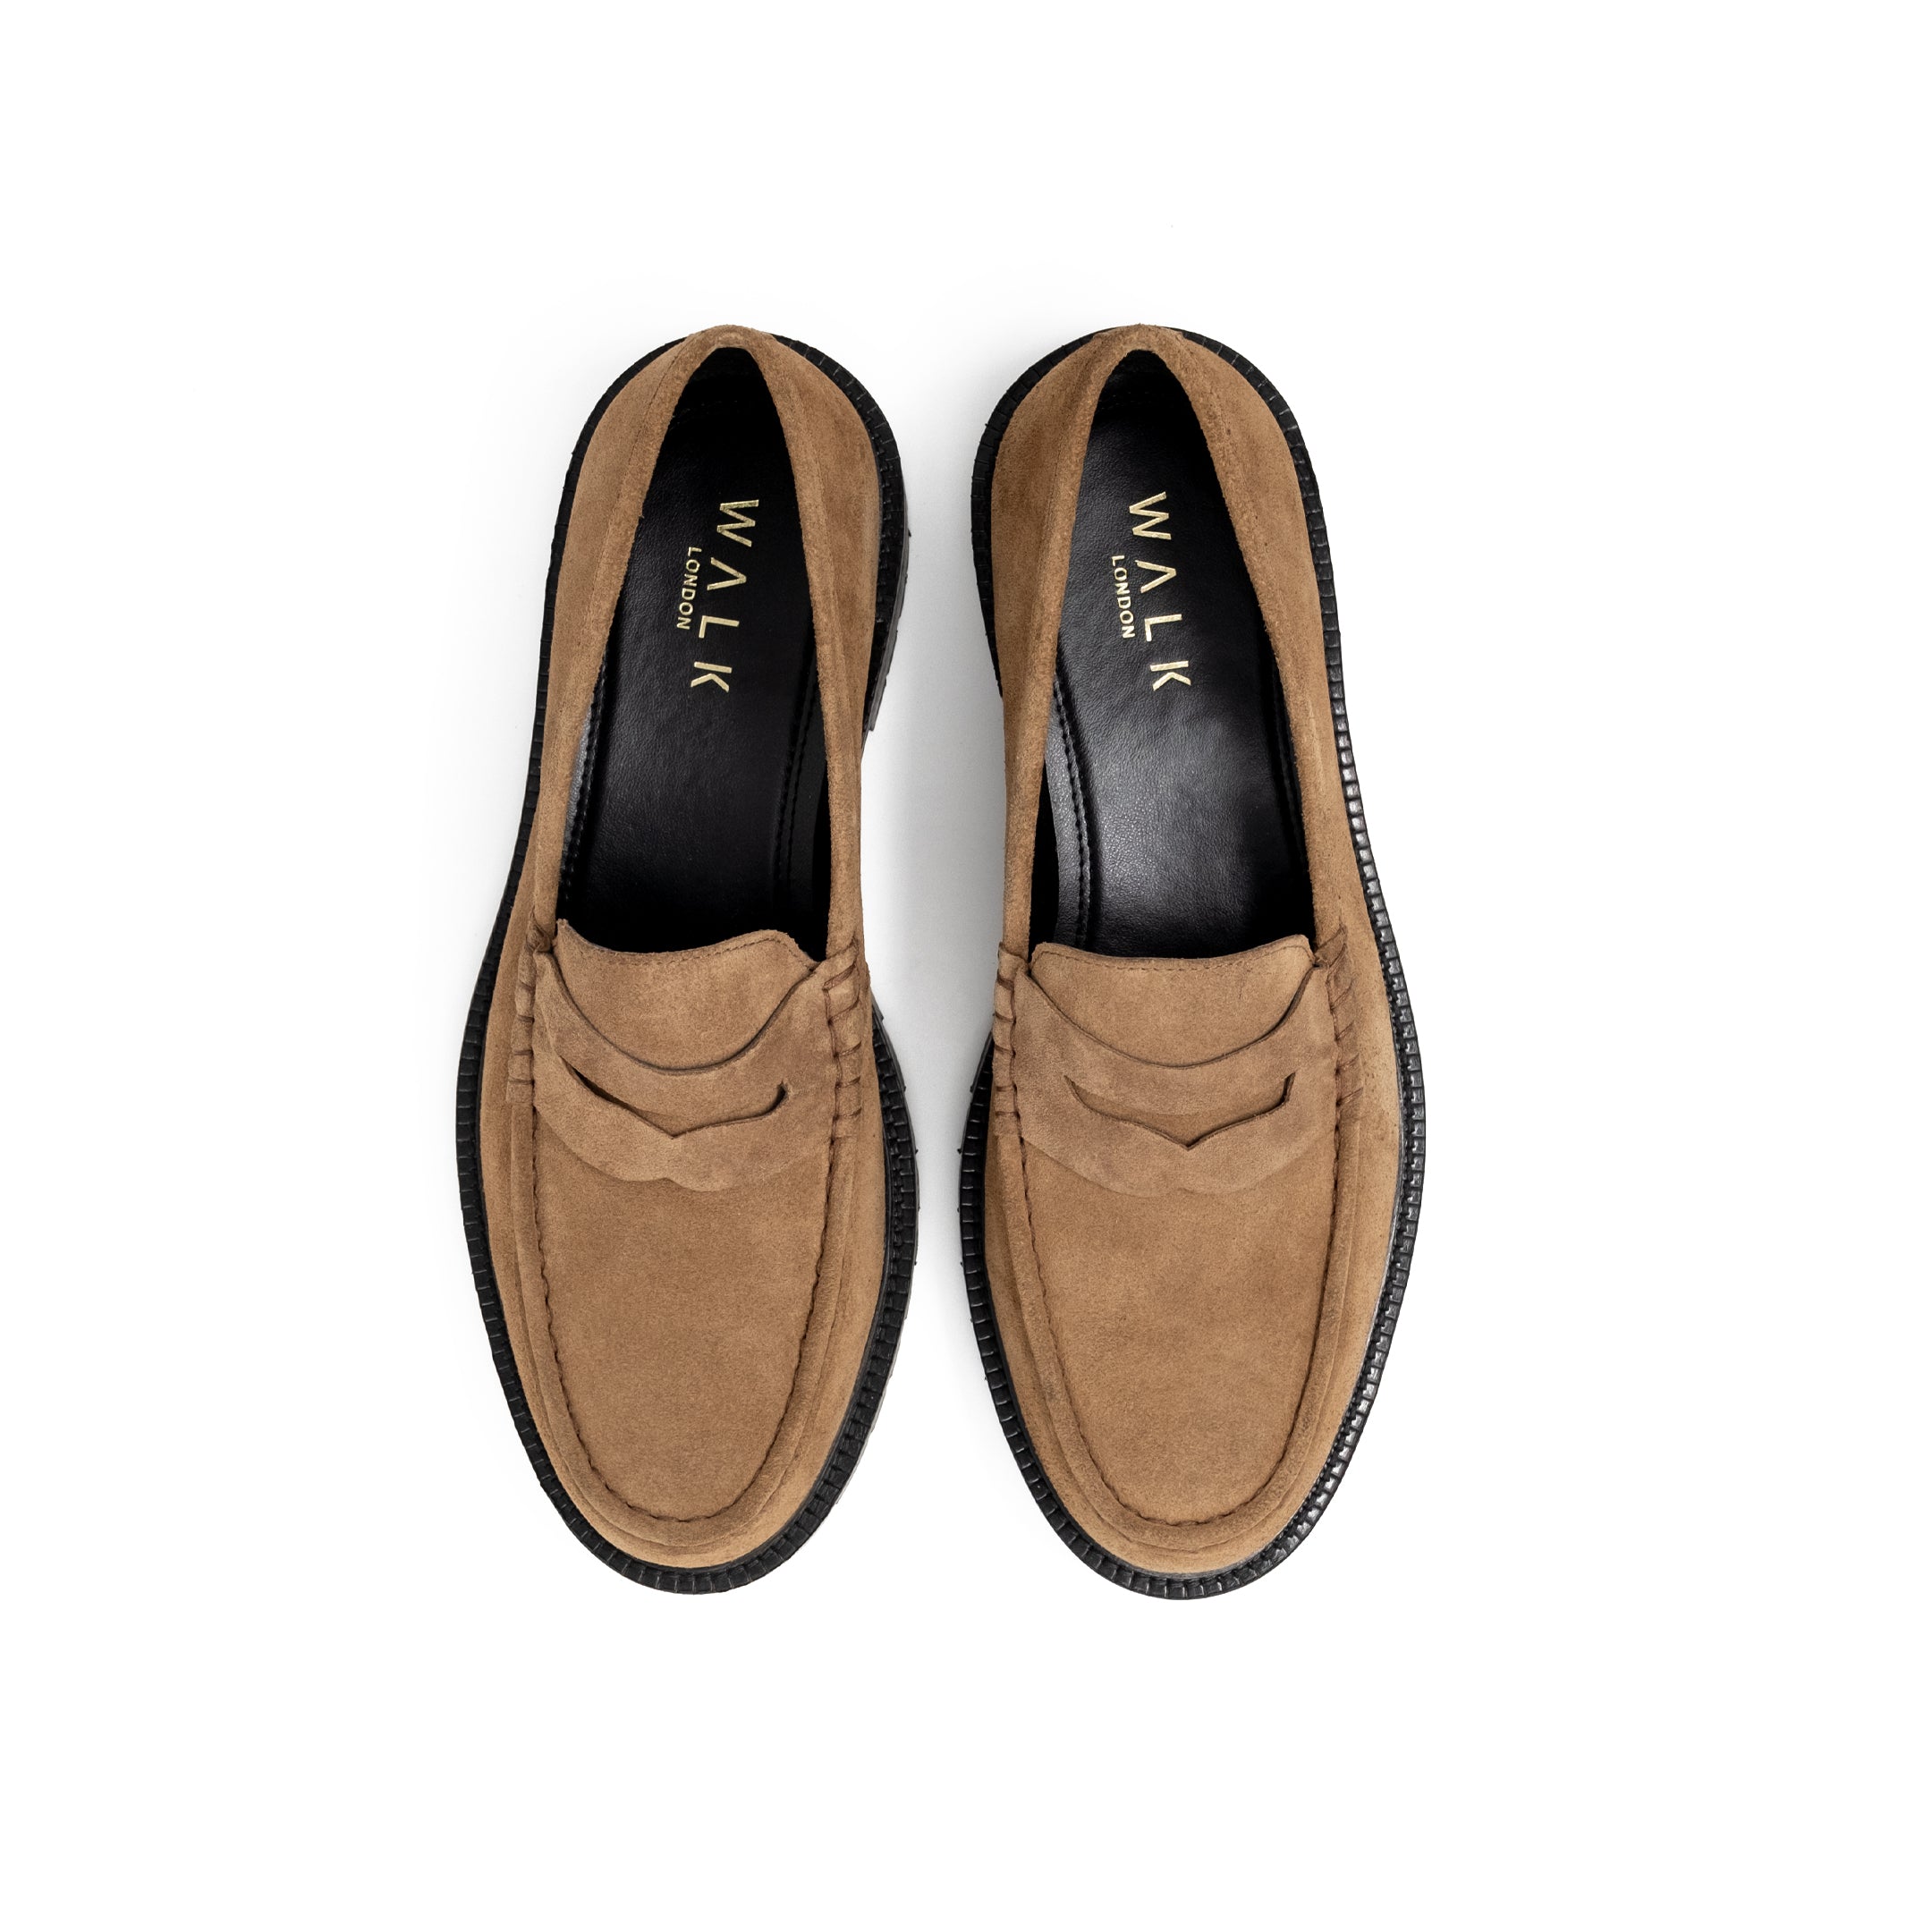 Birdseye View of the Walk London Campus Saddle Loafer in Tan Suede